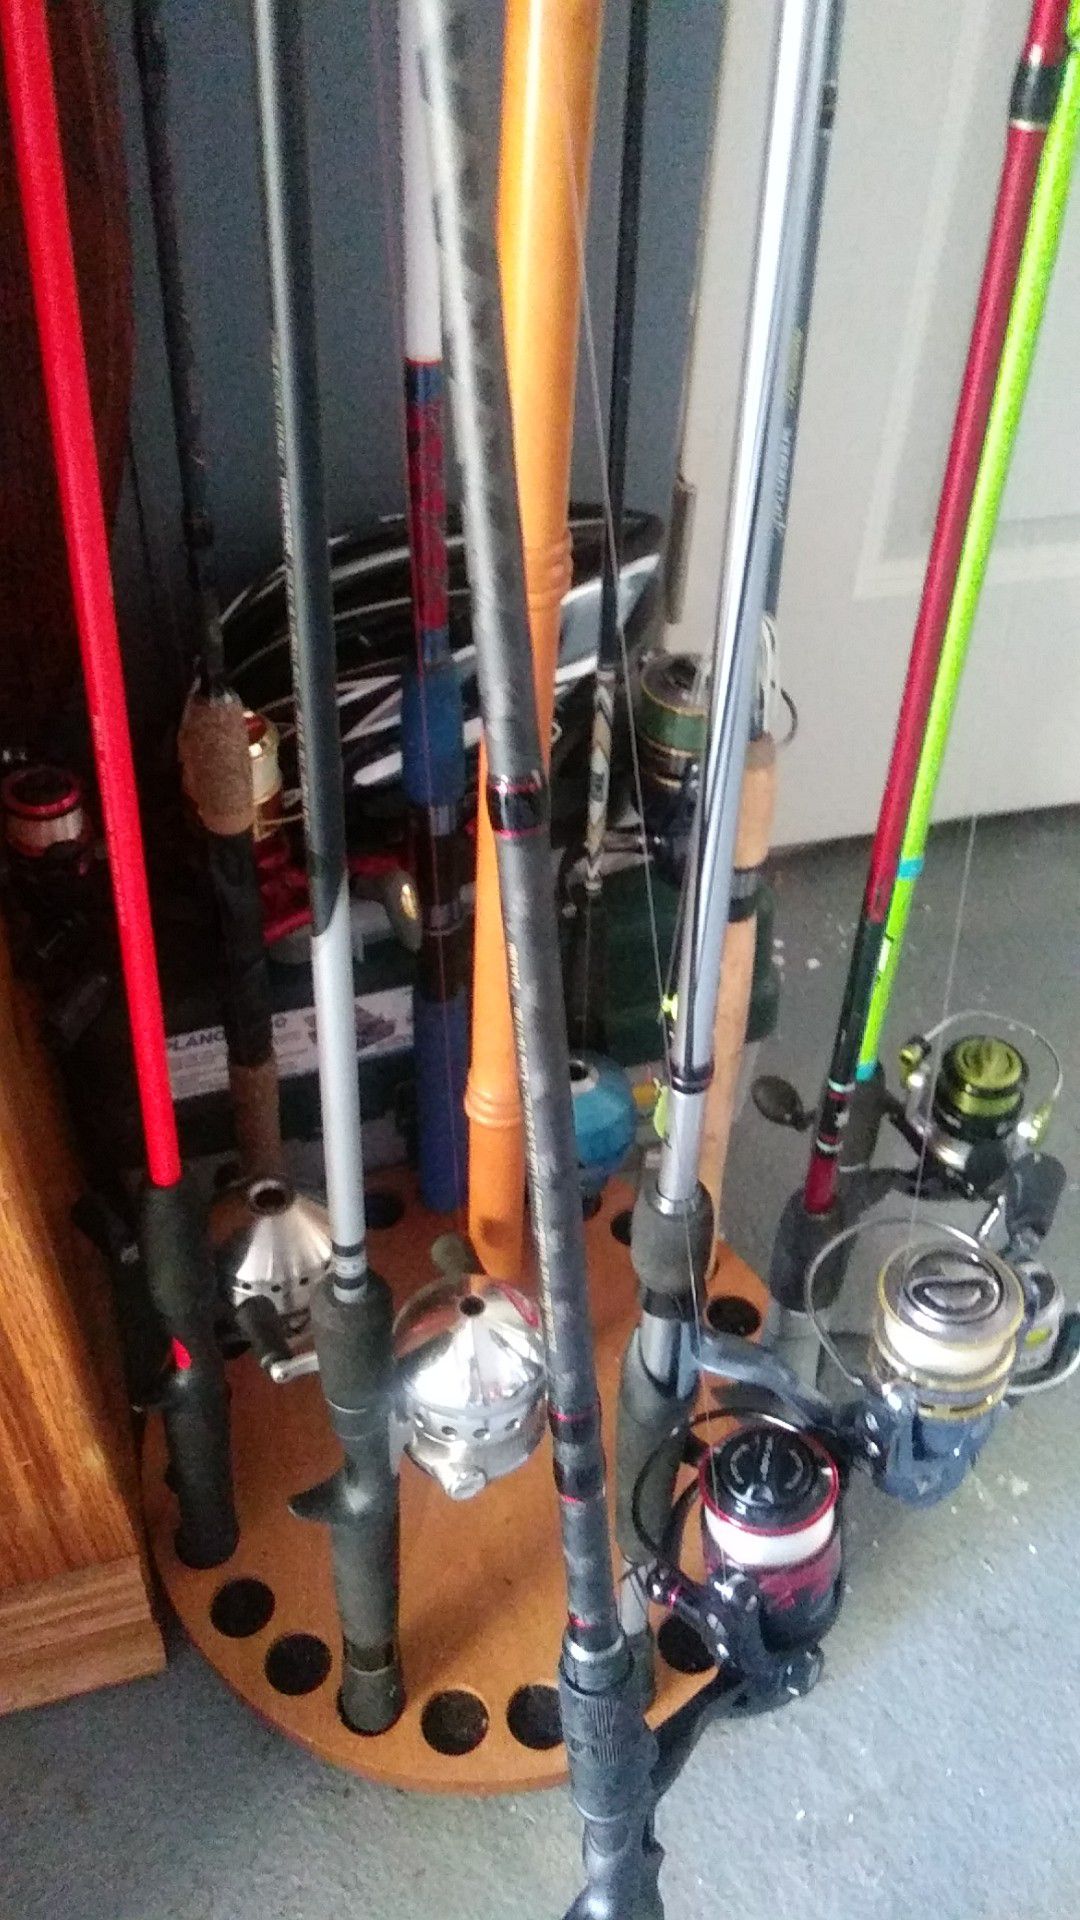 All brand new fishing poles 7 rods and reels $150